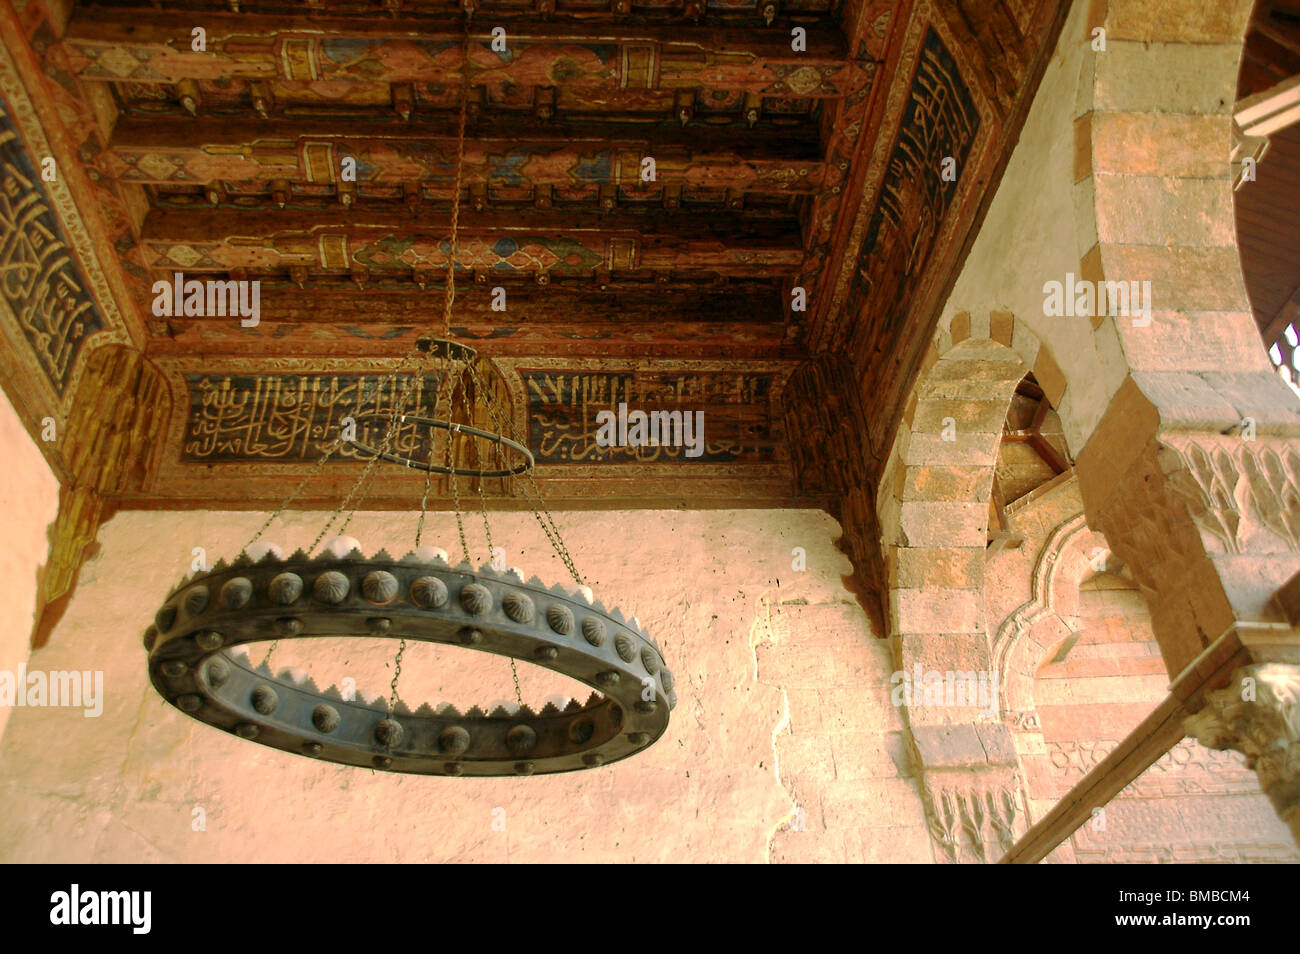 An iron chandelier and wooden ceiling decorated with Arabic script from the 14th century Mameluke era Amir Taz Palace in medieval Cairo, Egypt. Stock Photo